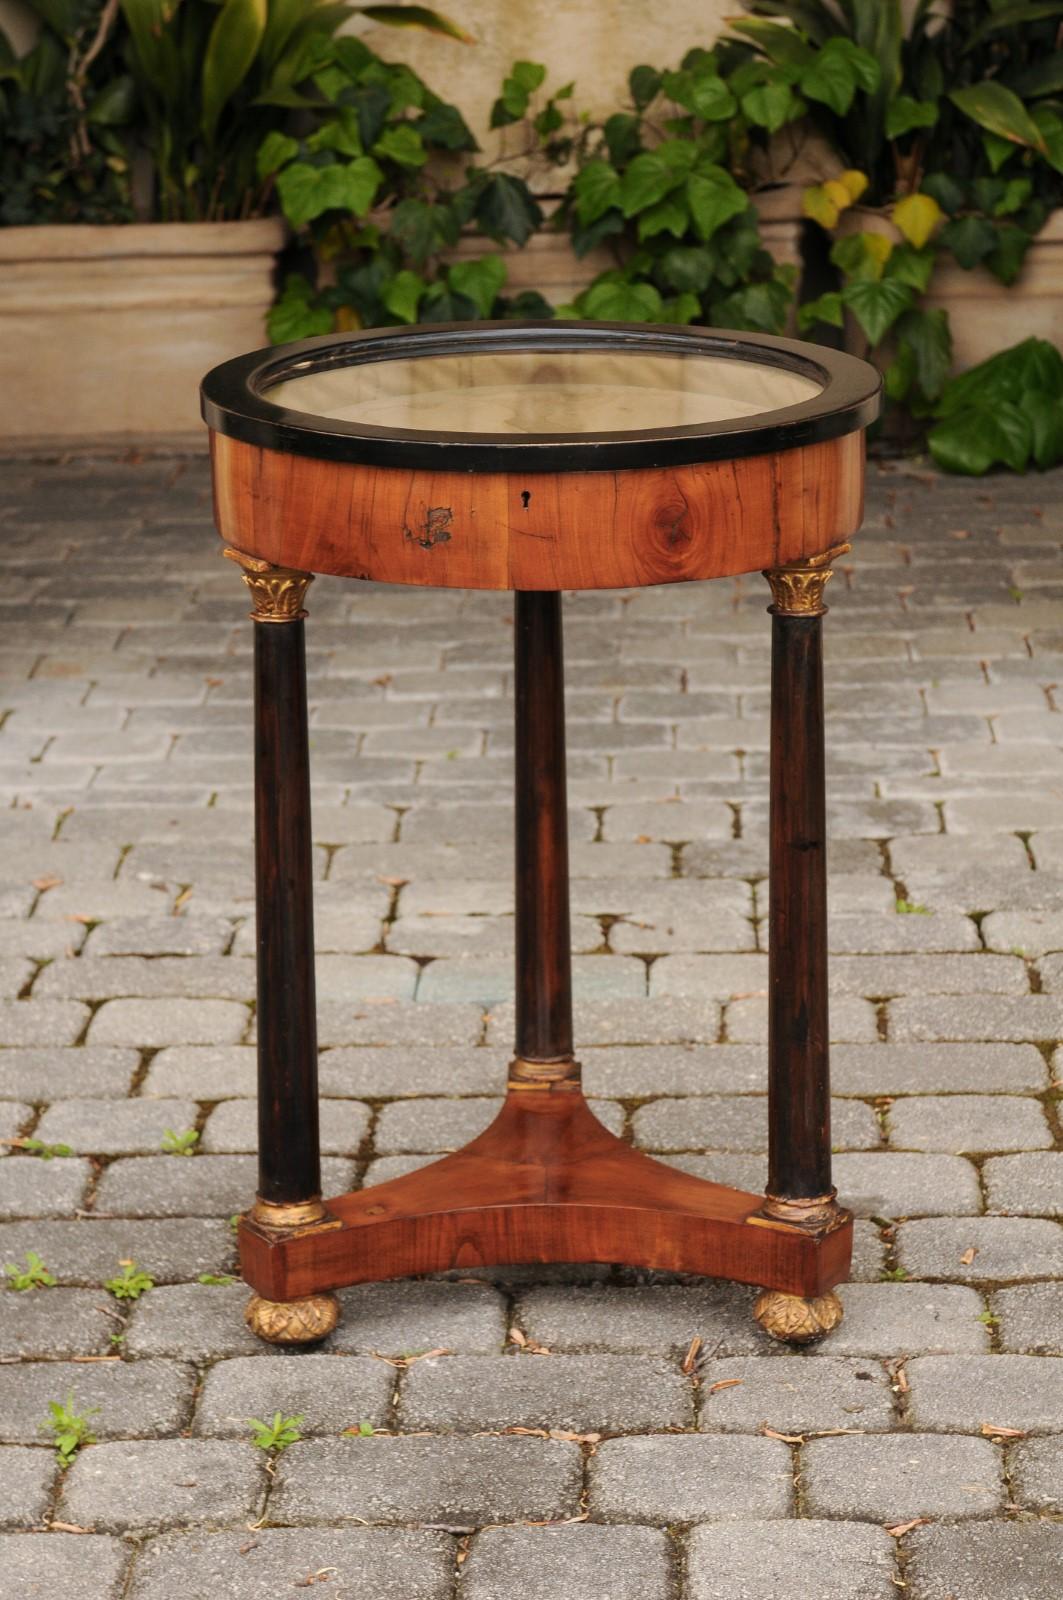 A French Empire style walnut gueridon table from the late 19th century, with vitrine top, corinthian columns, ebonized and gilt accents. Born in France during the third quarter of the 19th century, this exquisite French gueridon table features a